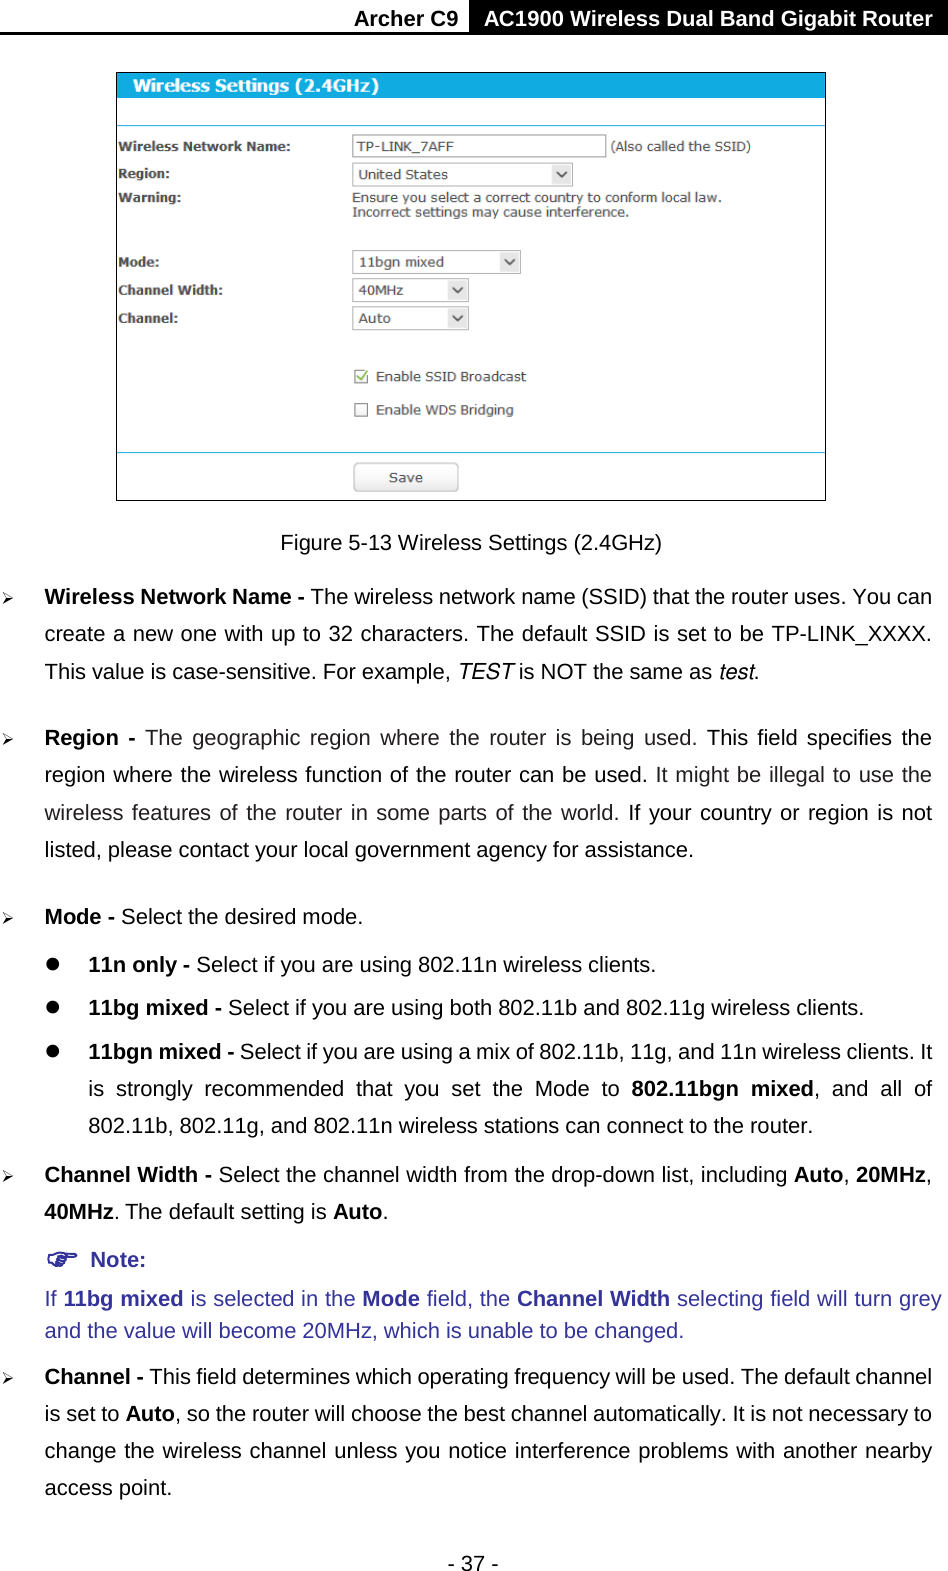 Archer C9 AC1900 Wireless Dual Band Gigabit Router   Figure 5-13 Wireless Settings (2.4GHz)  Wireless Network Name - The wireless network name (SSID) that the router uses. You can create a new one with up to 32 characters. The default SSID is set to be TP-LINK_XXXX. This value is case-sensitive. For example, TEST is NOT the same as test.    Region - The geographic region where the router is being used. This field specifies the region where the wireless function of the router can be used. It might be illegal to use the wireless features of the router in some parts of the world. If your country or region is not listed, please contact your local government agency for assistance.  Mode - Select the desired mode.    11n only - Select if you are using 802.11n wireless clients.  11bg mixed - Select if you are using both 802.11b and 802.11g wireless clients.  11bgn mixed - Select if you are using a mix of 802.11b, 11g, and 11n wireless clients. It is strongly recommended that you set the Mode to 802.11bgn mixed, and all of 802.11b, 802.11g, and 802.11n wireless stations can connect to the router.  Channel Width - Select the channel width from the drop-down list, including Auto, 20MHz, 40MHz. The default setting is Auto.  Note:   If 11bg mixed is selected in the Mode field, the Channel Width selecting field will turn grey and the value will become 20MHz, which is unable to be changed.    Channel - This field determines which operating frequency will be used. The default channel is set to Auto, so the router will choose the best channel automatically. It is not necessary to change the wireless channel unless you notice interference problems with another nearby access point. - 37 - 